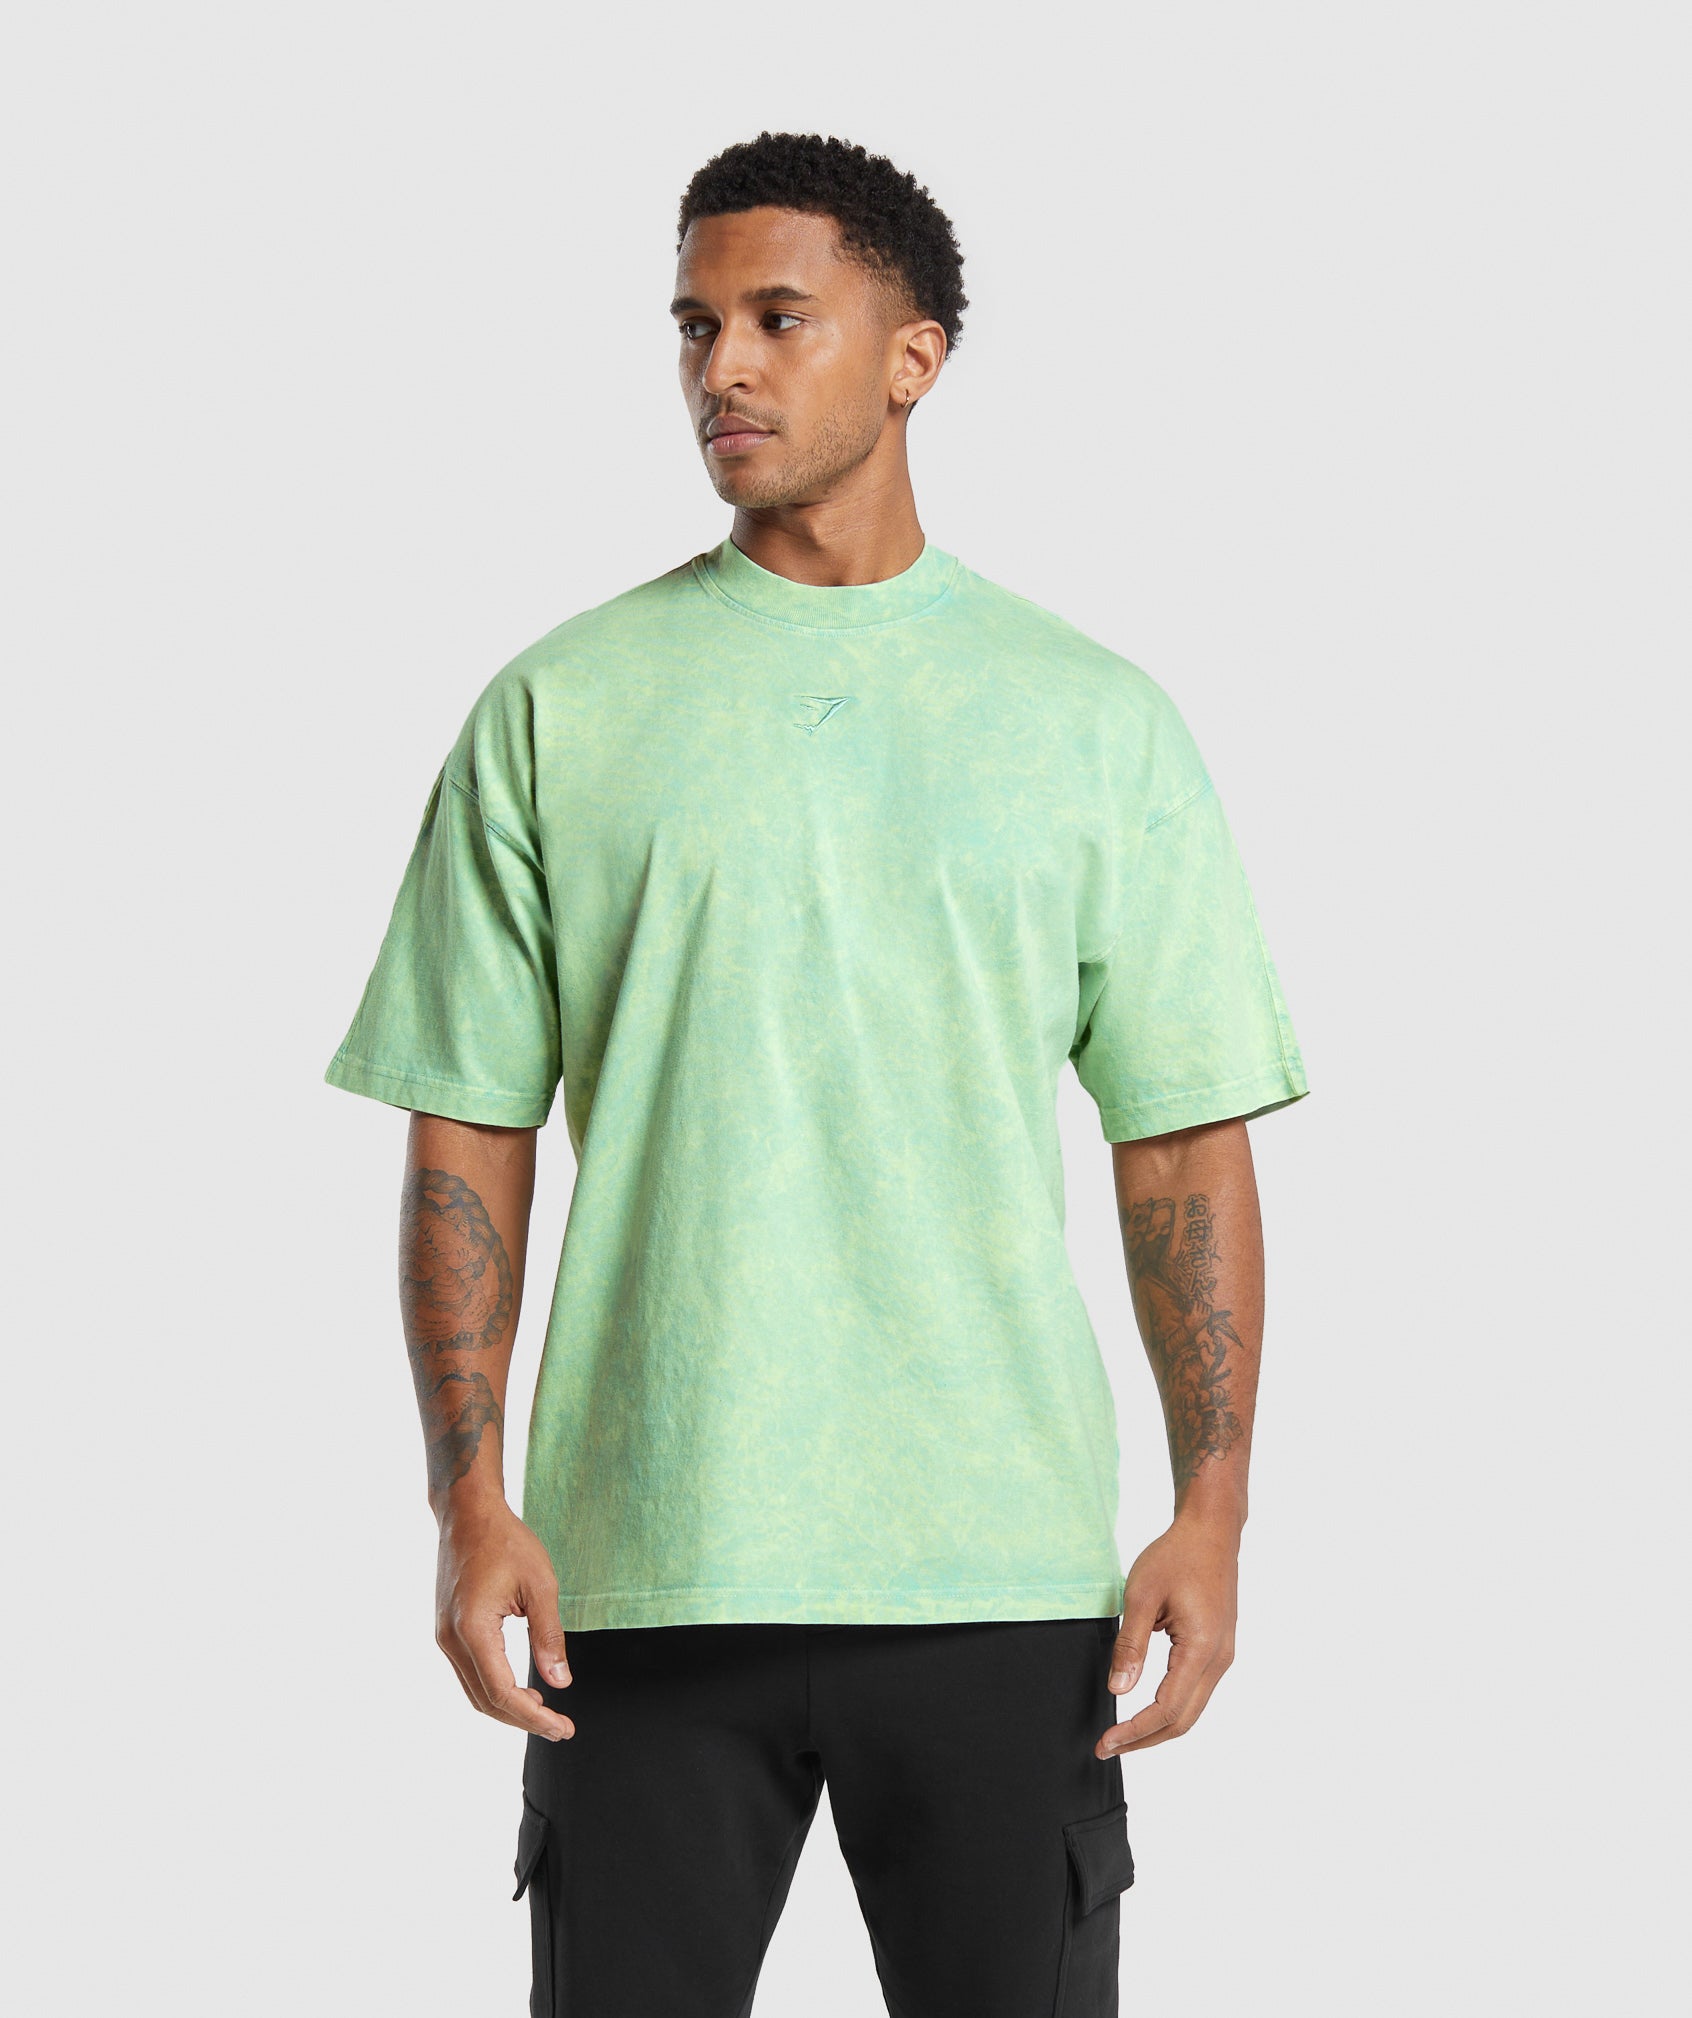 Rest Day Washed T-Shirt in Lido Green - view 1